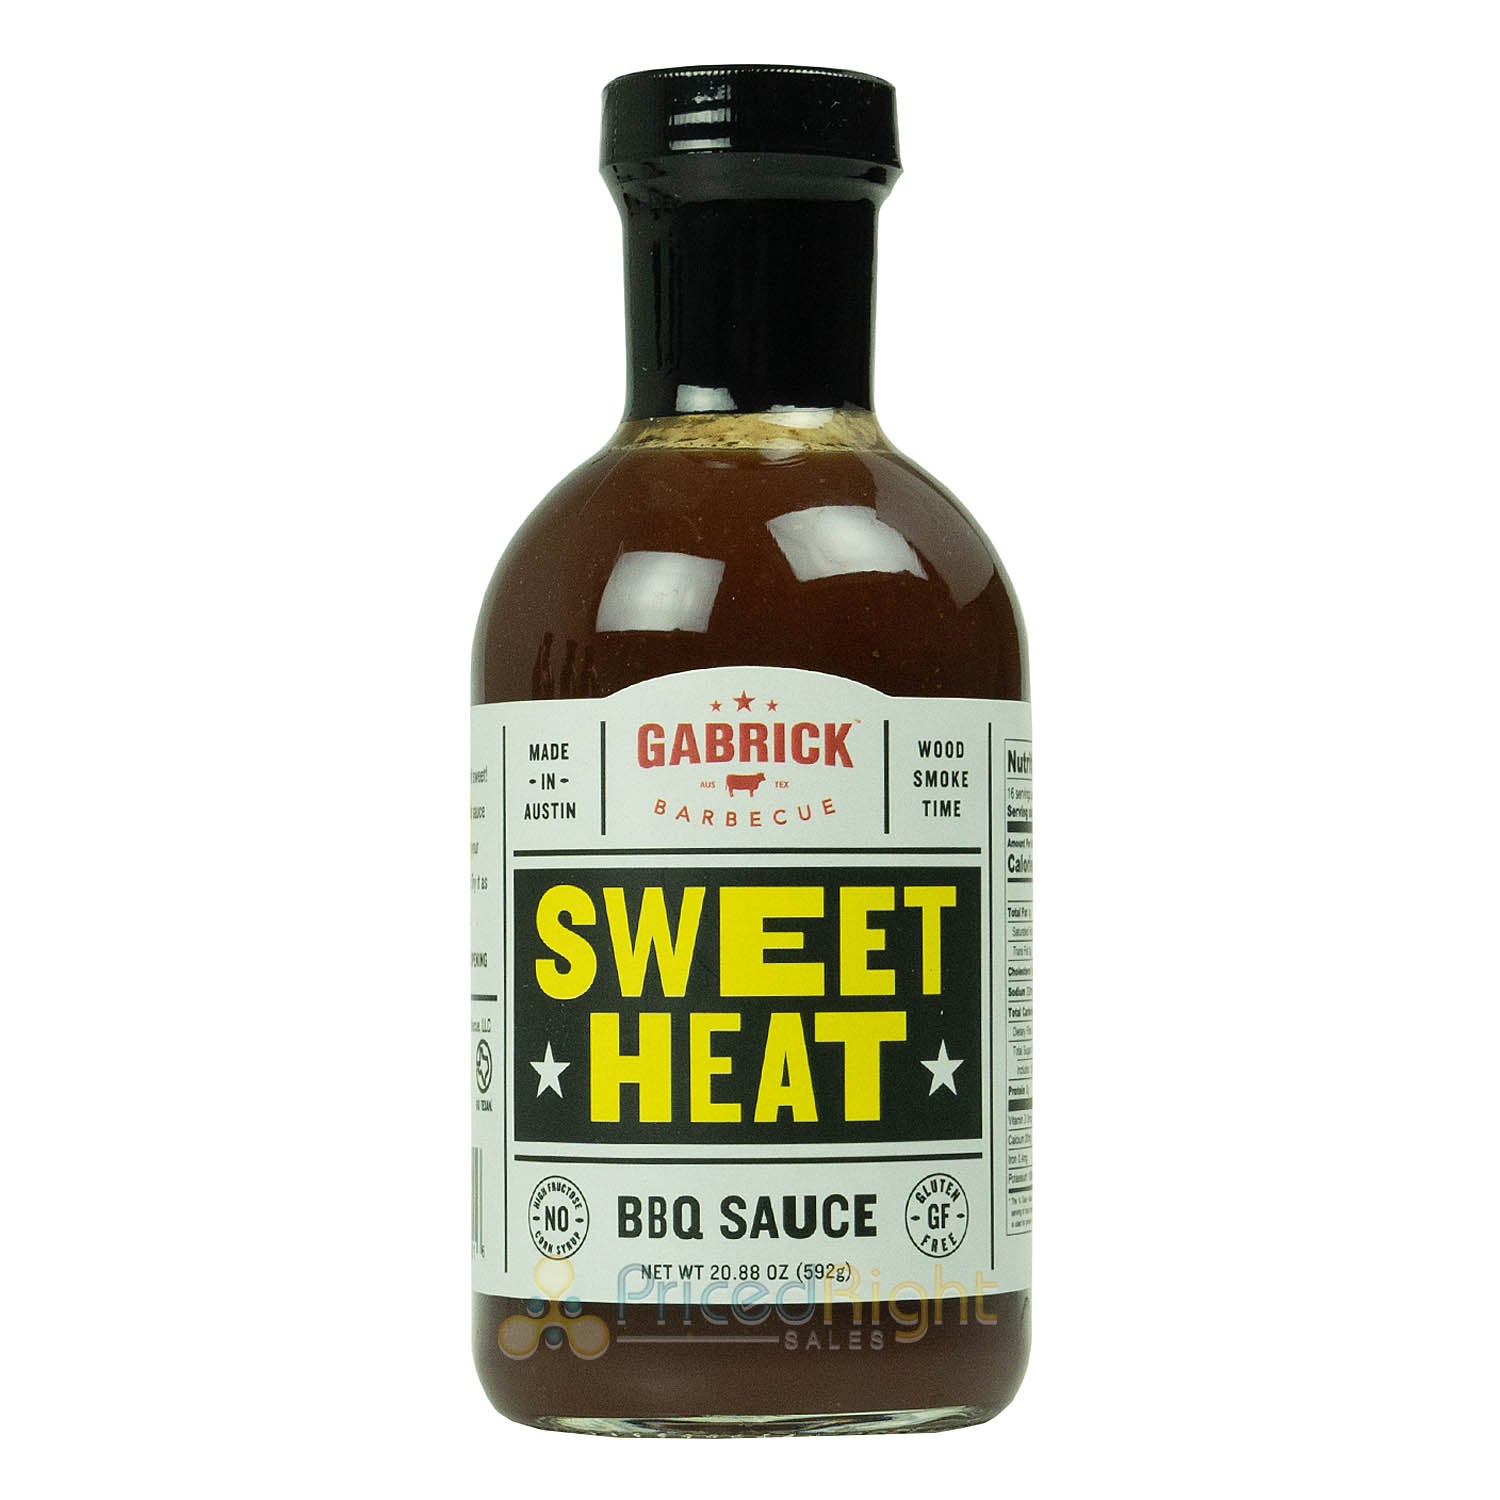 Gabrick's Sweet Heat BBQ Sauce Rich And Sweet All-Natural And Gluten Free Recipe